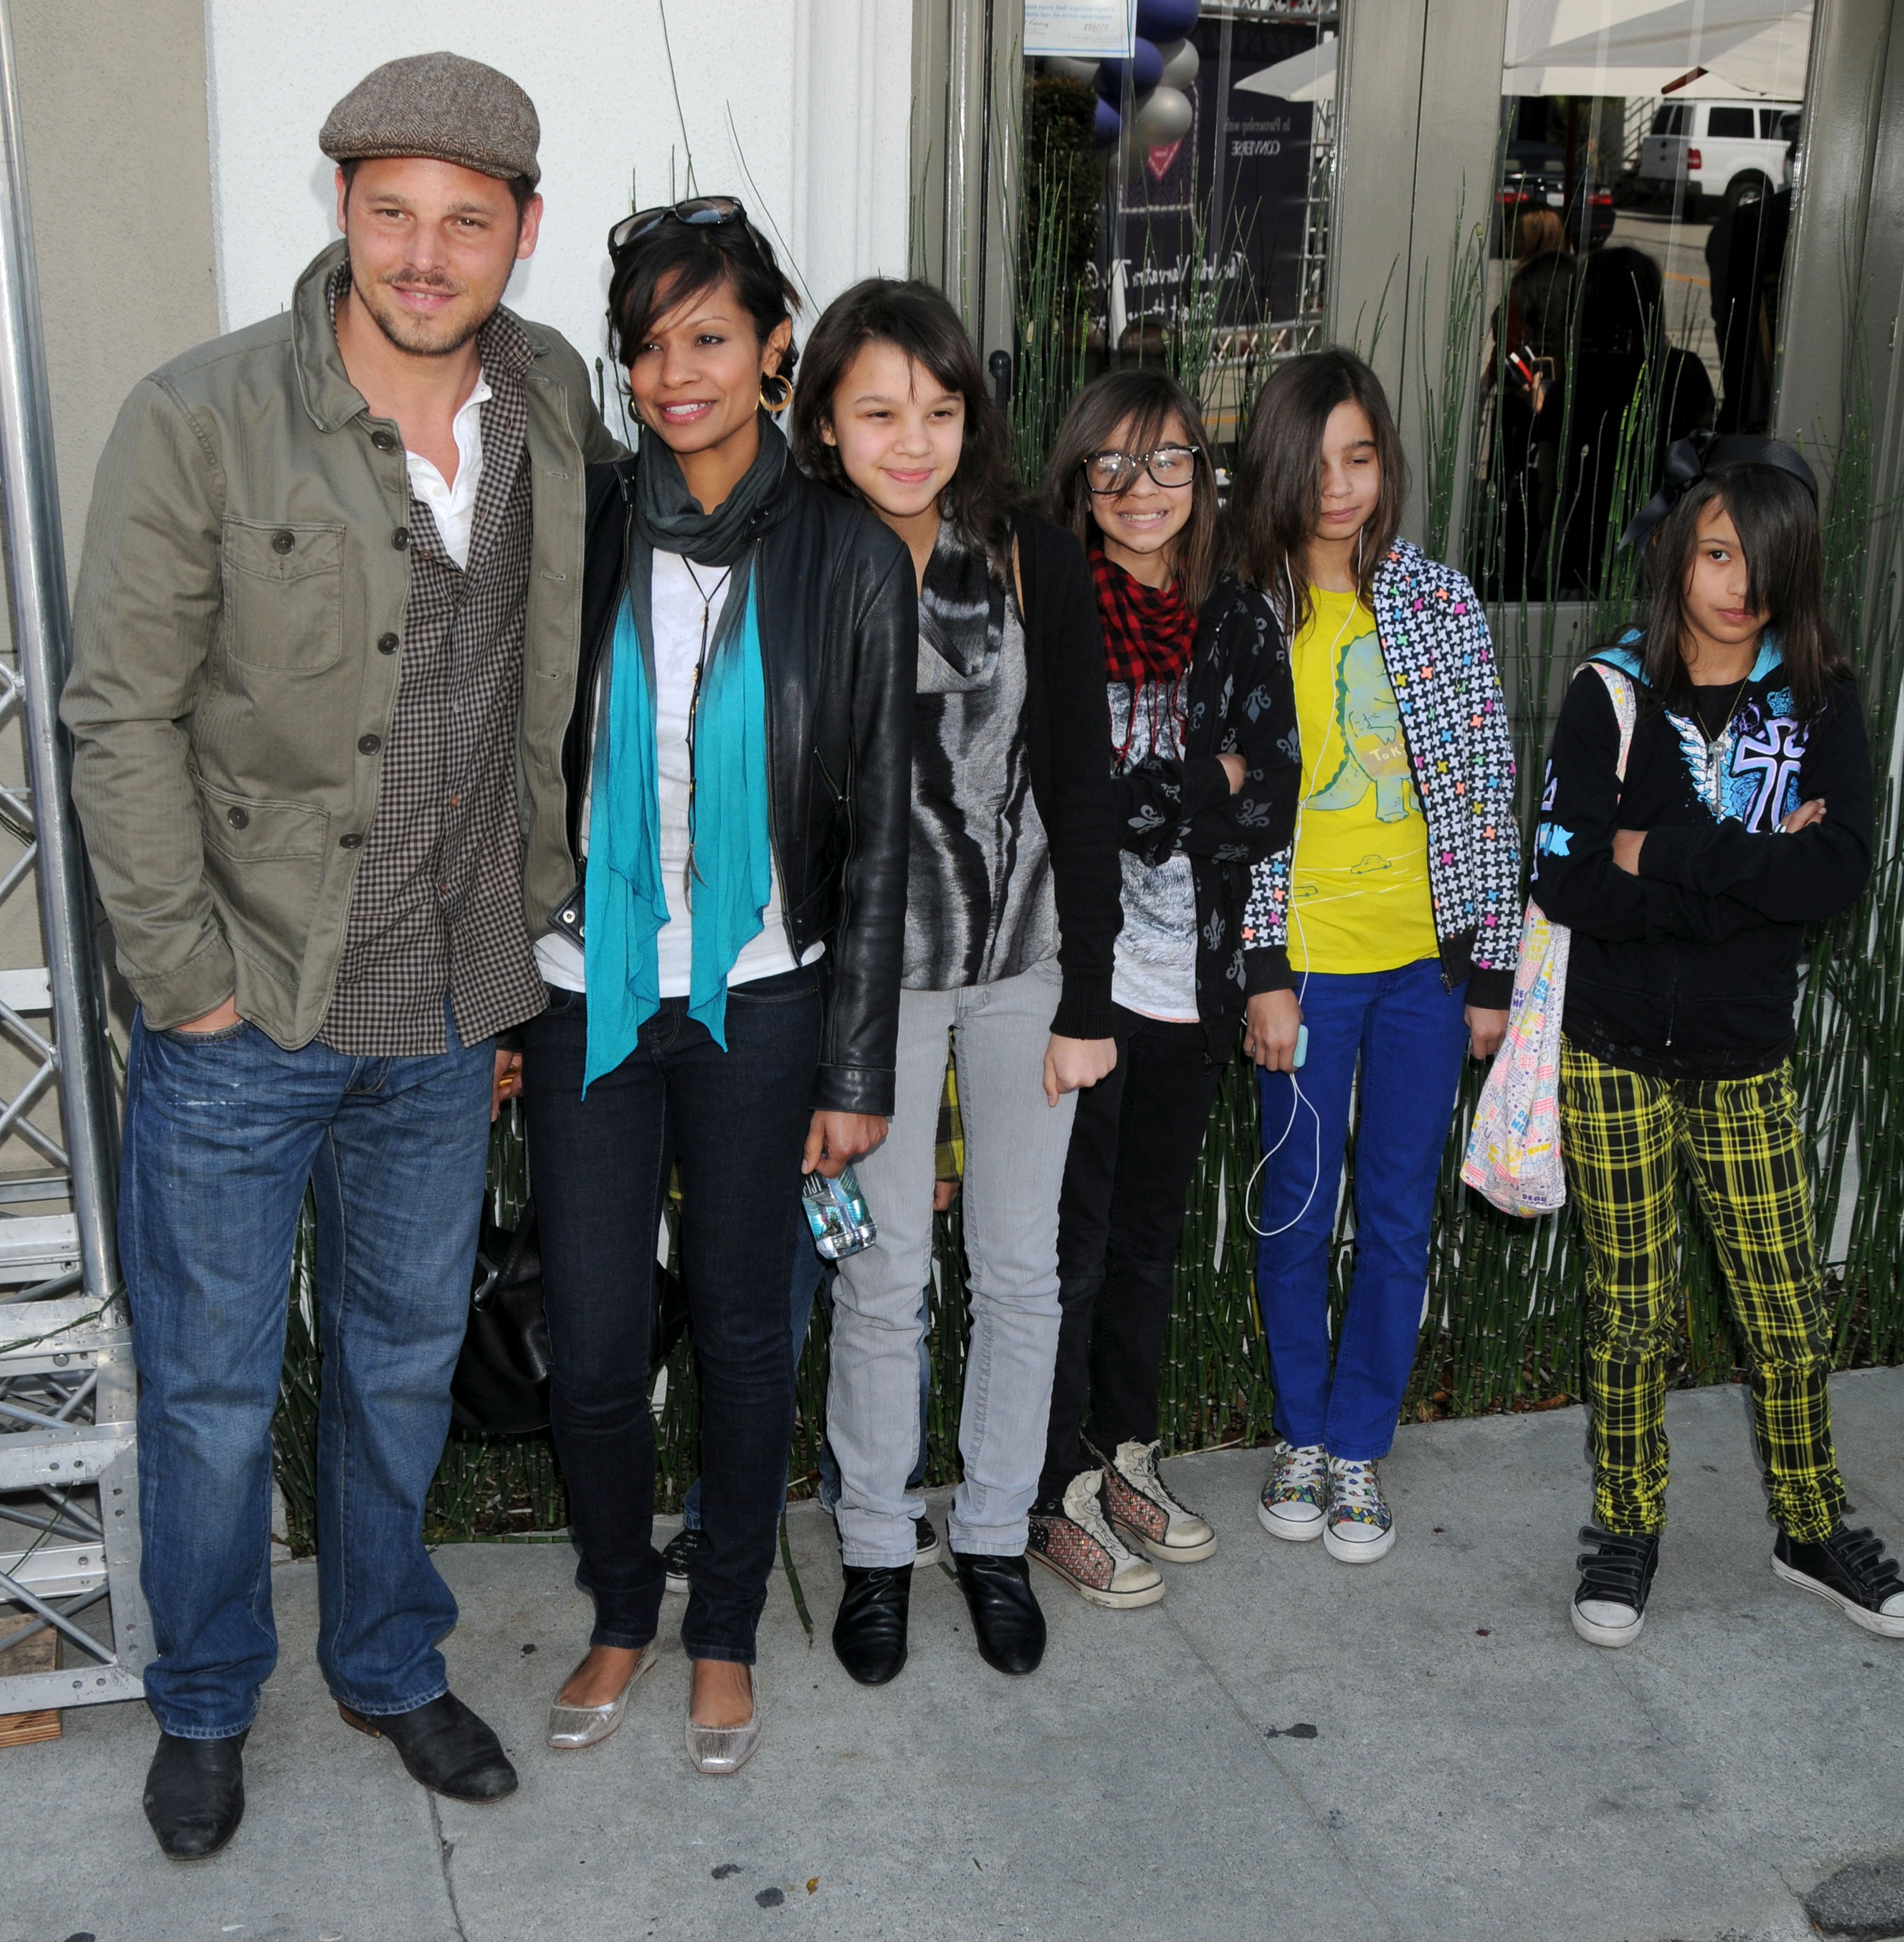  Justin Chambers, wife Keisha Chambers and children; John Varvatos 7th Annual Stuart House Benefit; Held at the John Varvatos Boutique on March 8, 2009 | Source: Getty Images